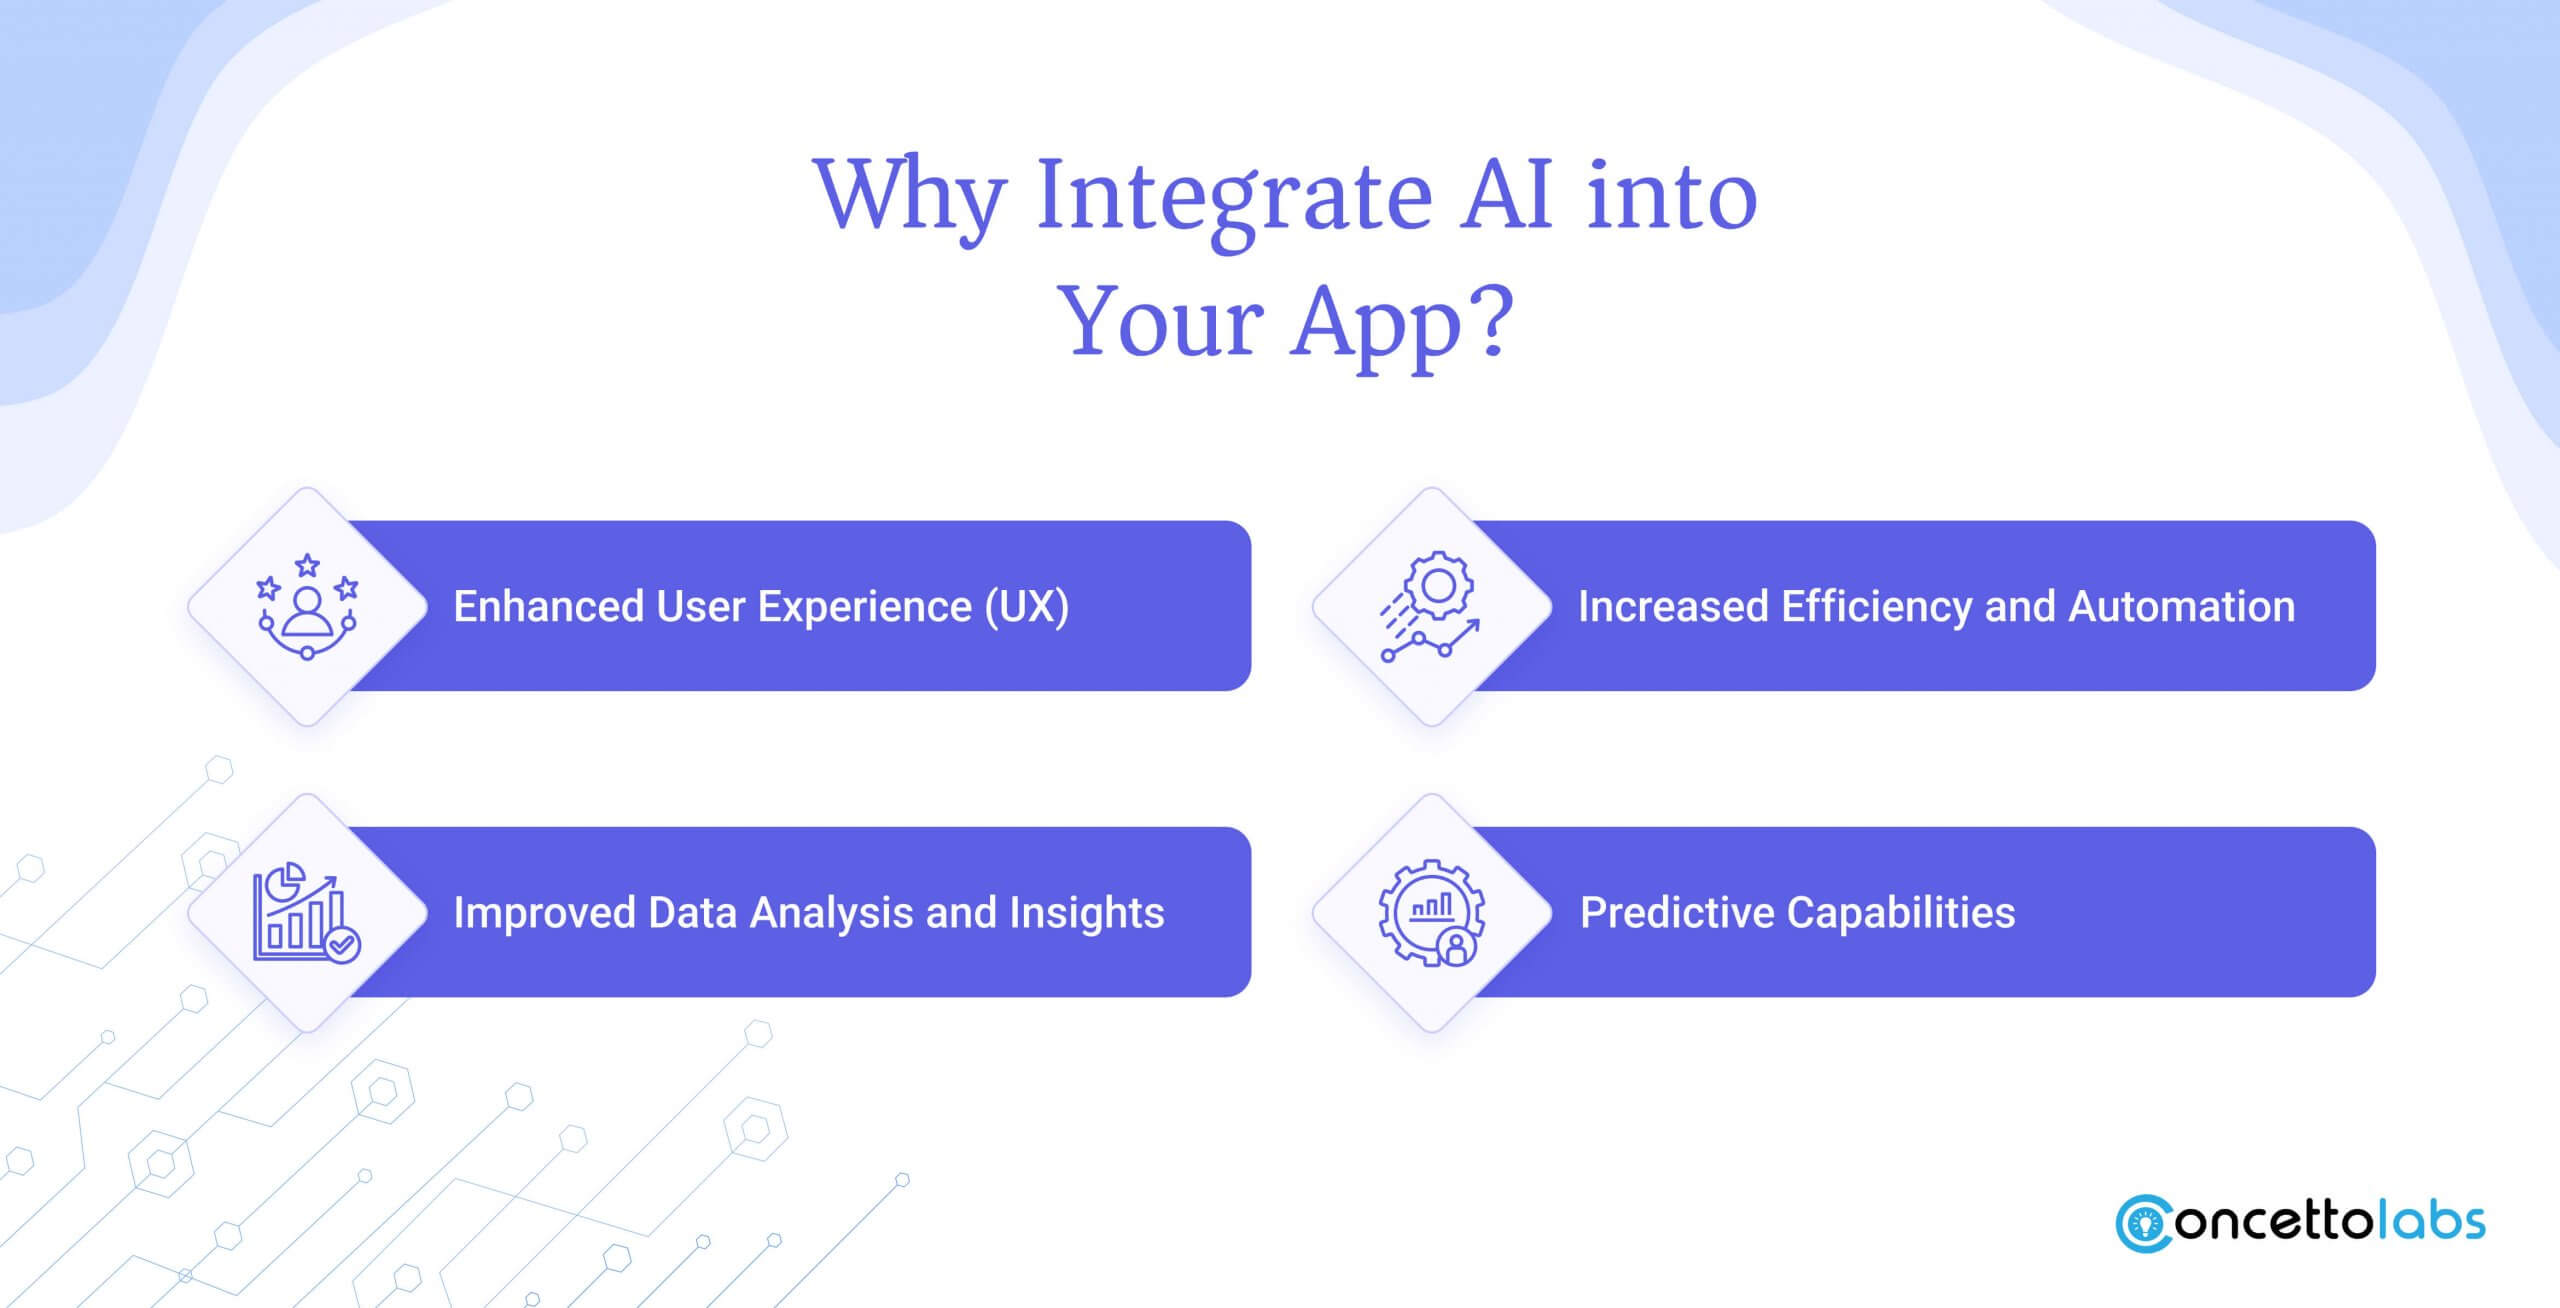 Why Integrate AI into Your App?